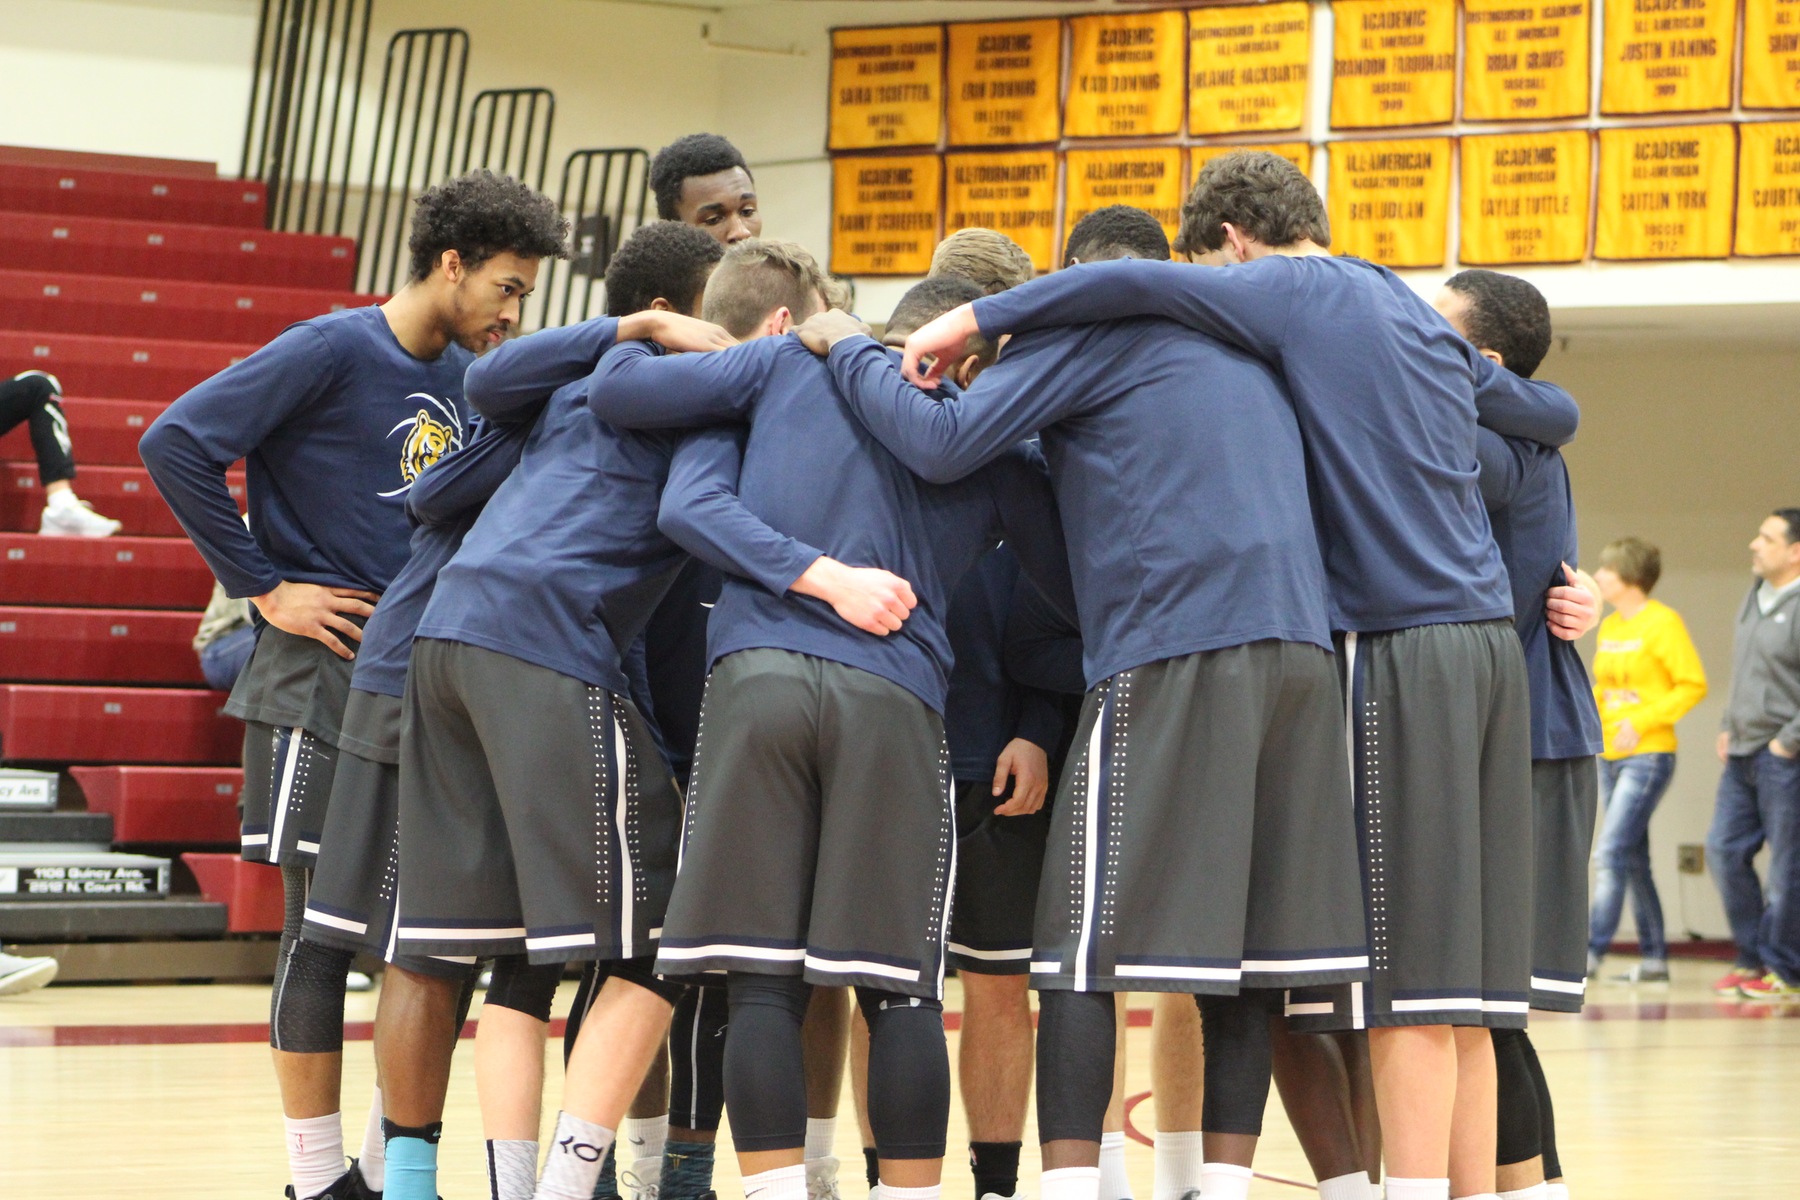 The MCC men's basketball team fell on the road to Indian Hills on Saturday night, 76-60